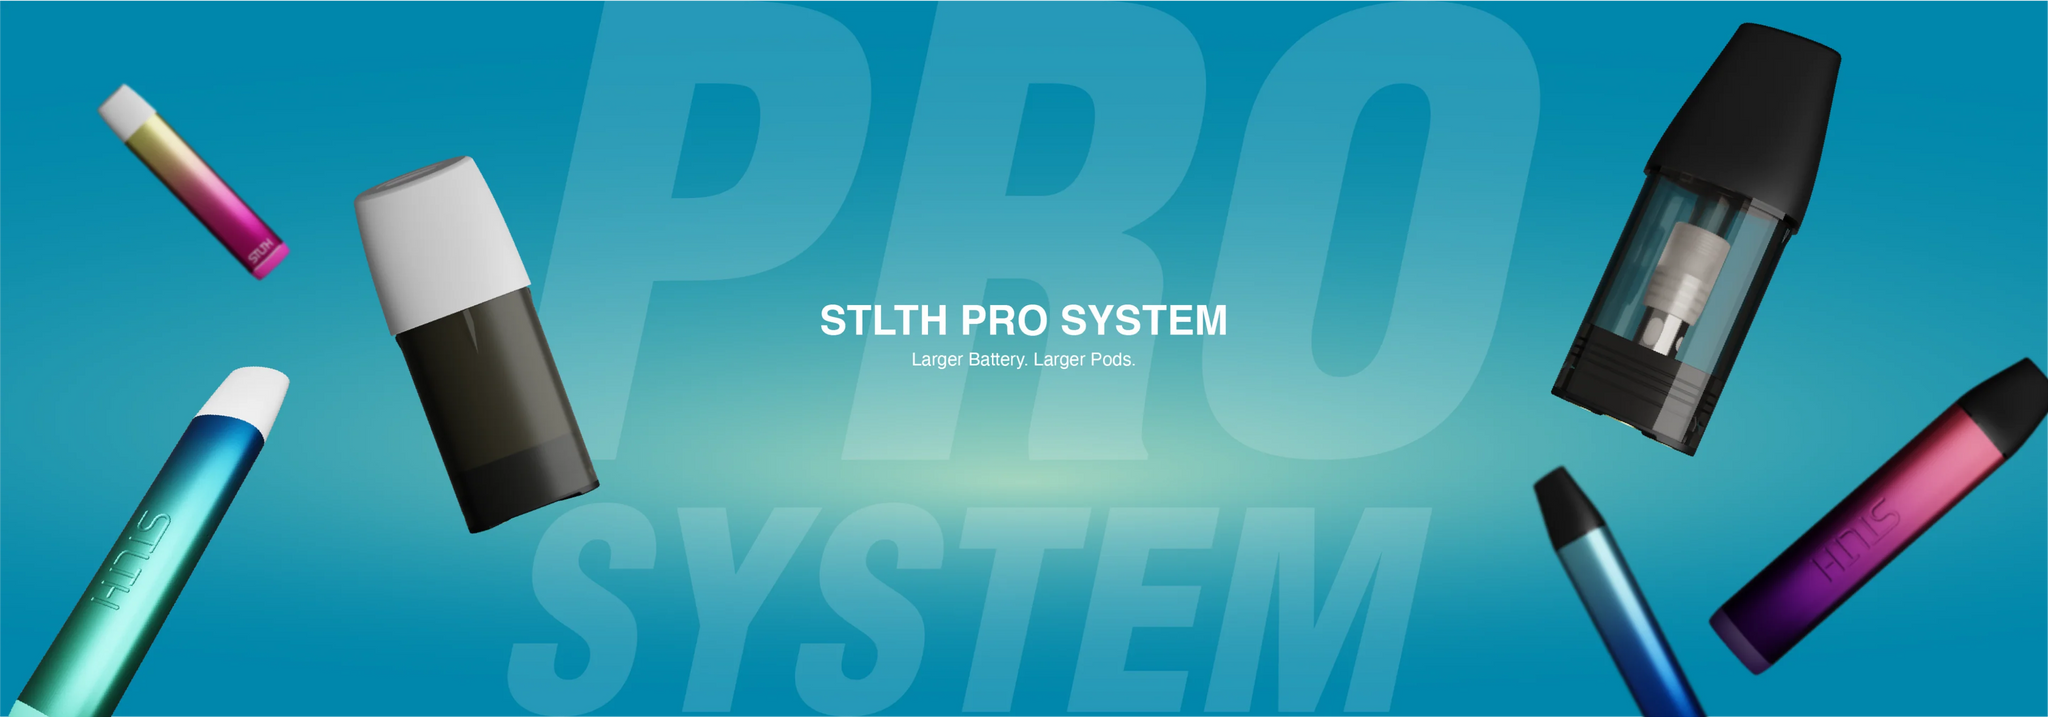 STLTH Pro Pods - Canada and Quebec Free Vape Shipping